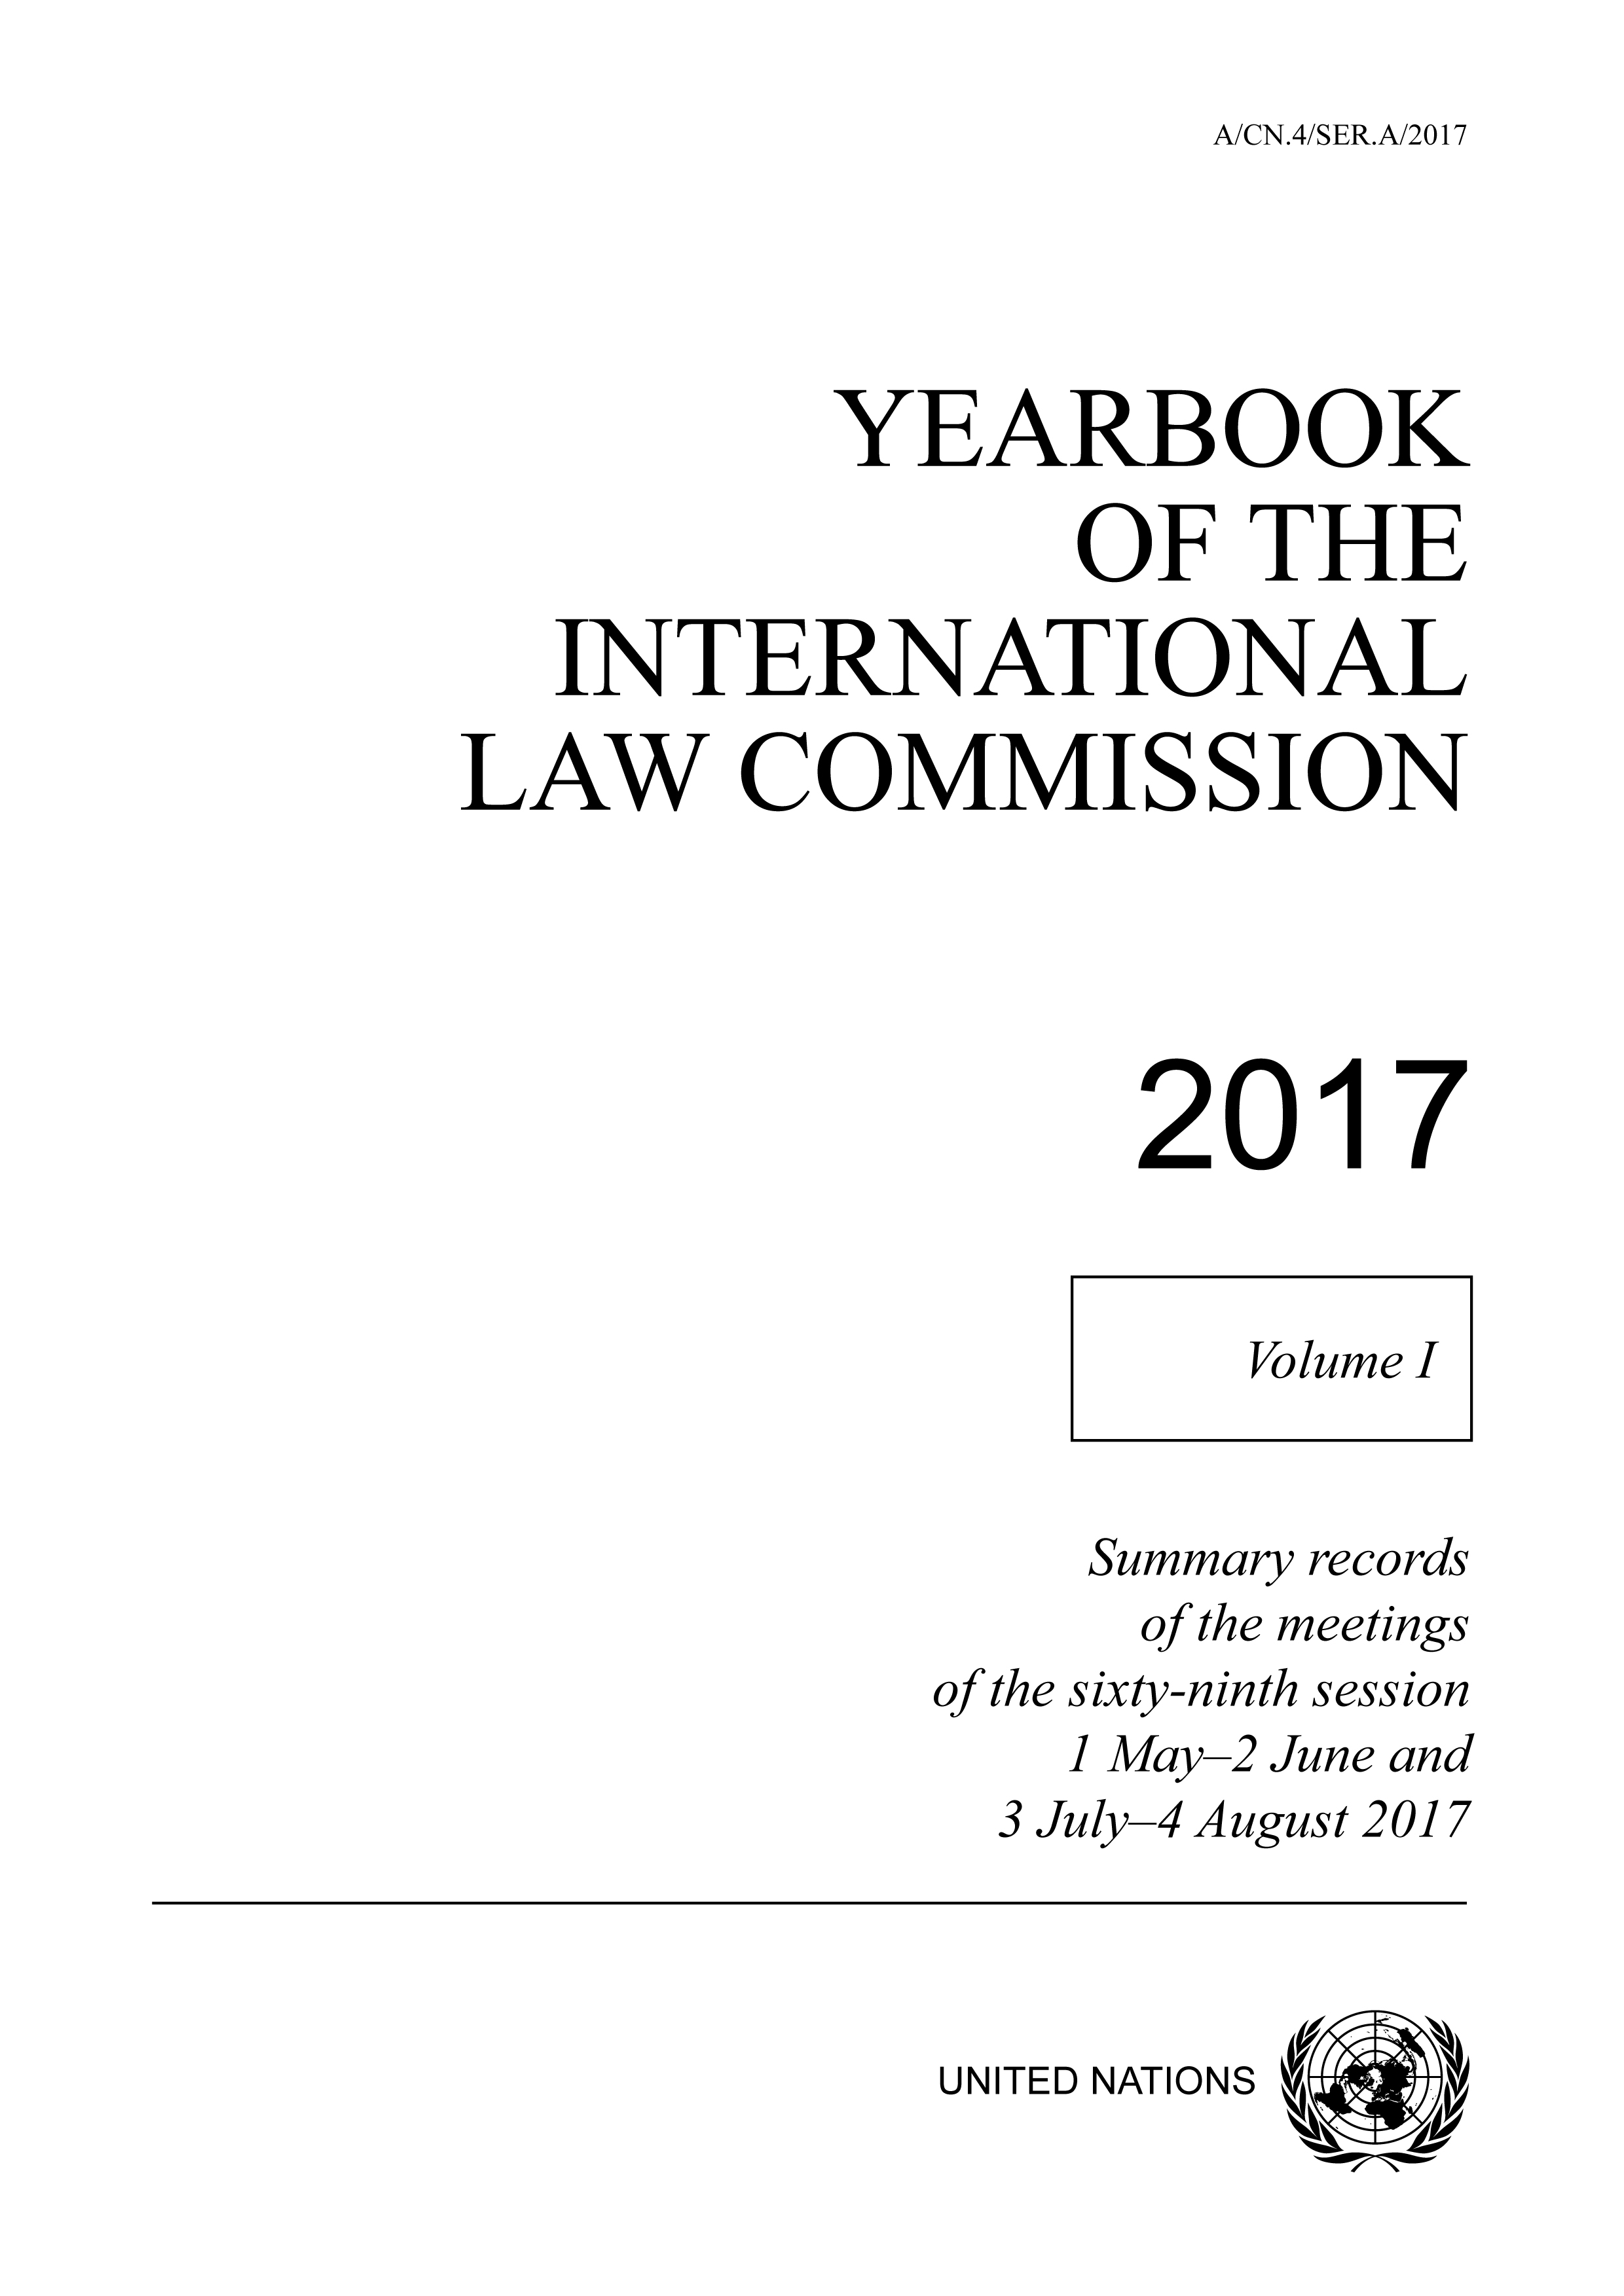 image of Yearbook of the International Law Commission 2017, Vol. I